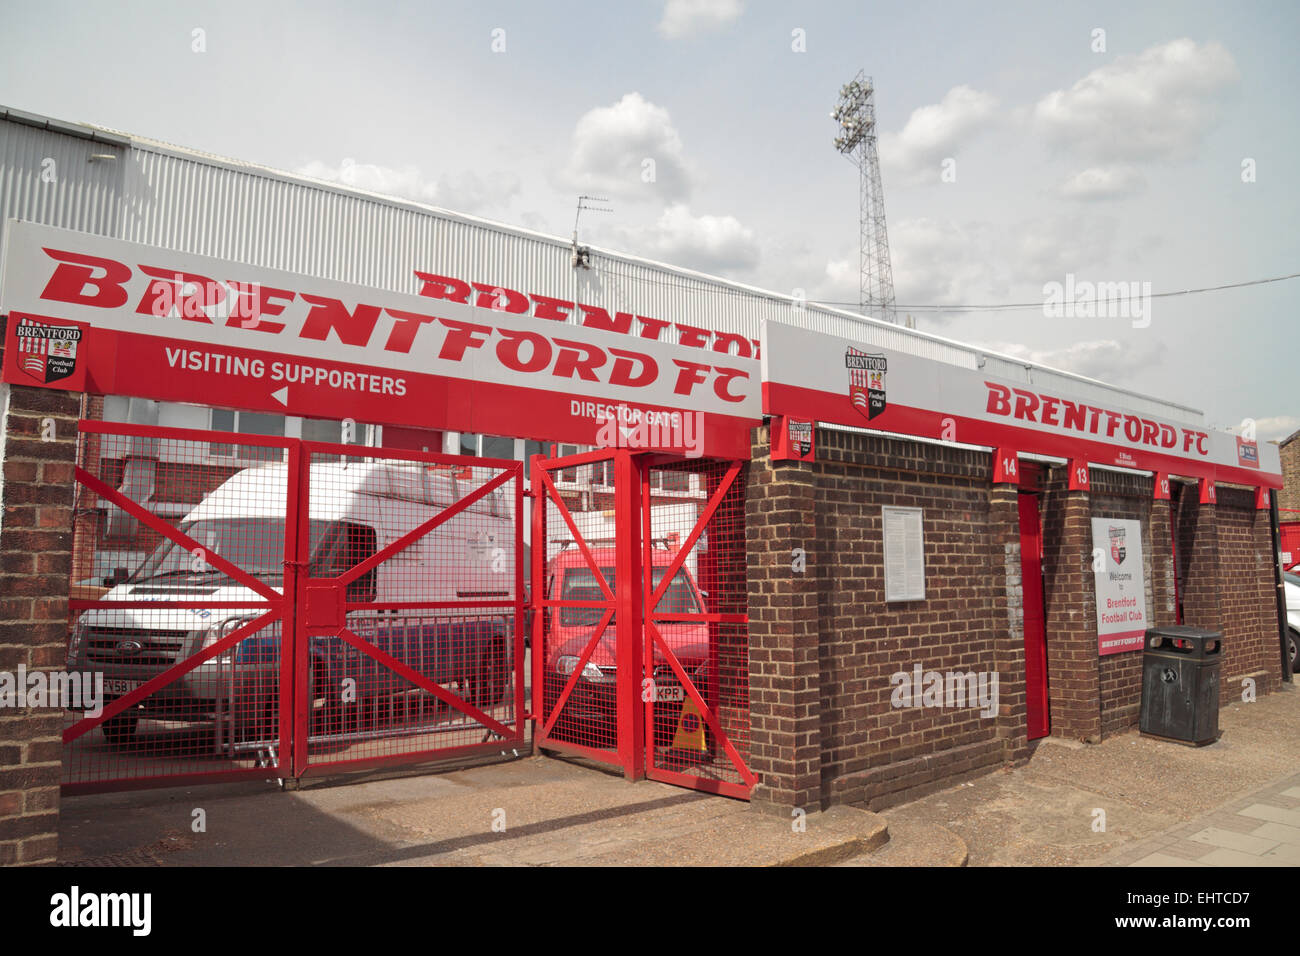 An Entrance To Griffin Park The Ground Of Brentford Football Club In West London England Stock Photo Alamy